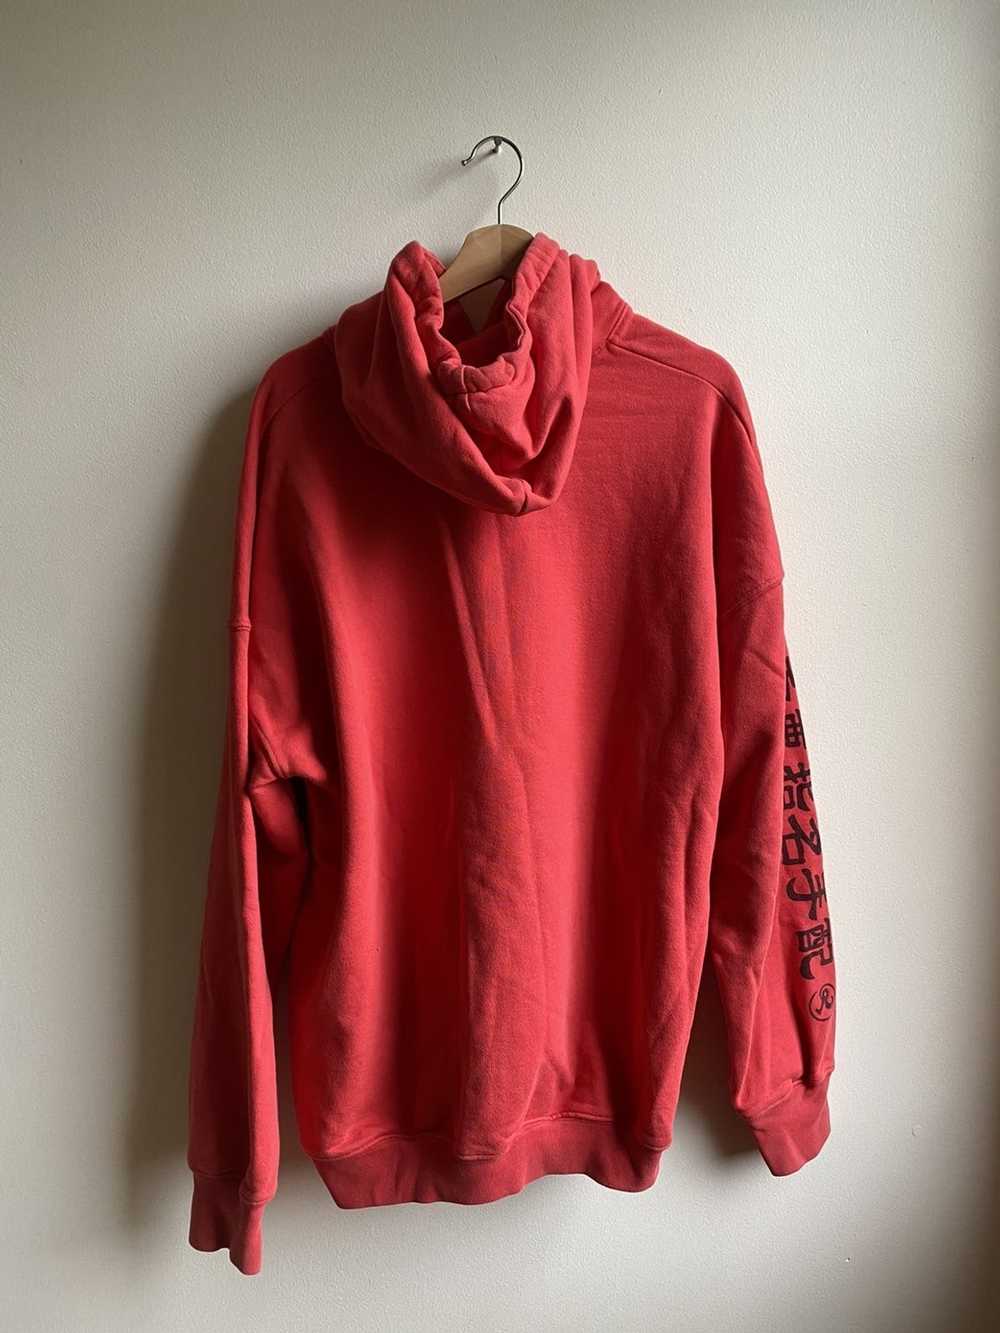 Richardson Wanted Pornstar Red Hoody - image 2